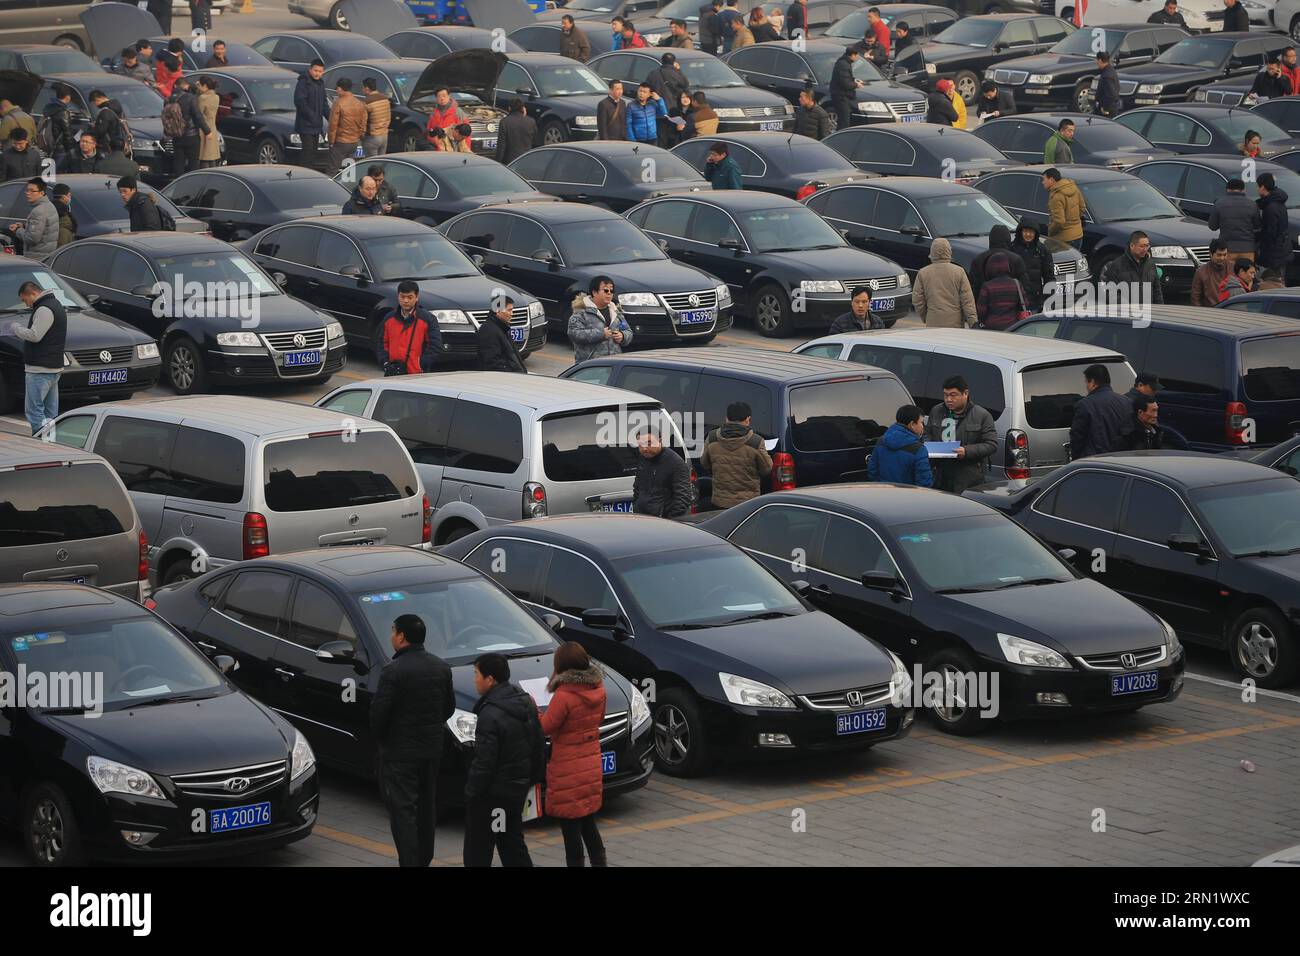 (150123) -- BEIJING, Jan. 23, 2015 -- People view the cars to be auctioned at the Yayuncun Automobile Trader Market in Beijing, capital of China, Jan. 23, 2015. The central government has impounded 3,184 official vehicles and plans to auction the first 300 before the Spring Festival, said the National Government Offices Administration (NGOA) on Jan. 16. ) (wyo) CHINA-BEIJING-GOVERNMENT CARS-AUCTION (CN) XingxGuangli PUBLICATIONxNOTxINxCHN   Beijing Jan 23 2015 Celebrities View The Cars to Be auctioned AT The  Automobiles Trader Market in Beijing Capital of China Jan 23 2015 The Central Governm Stock Photo